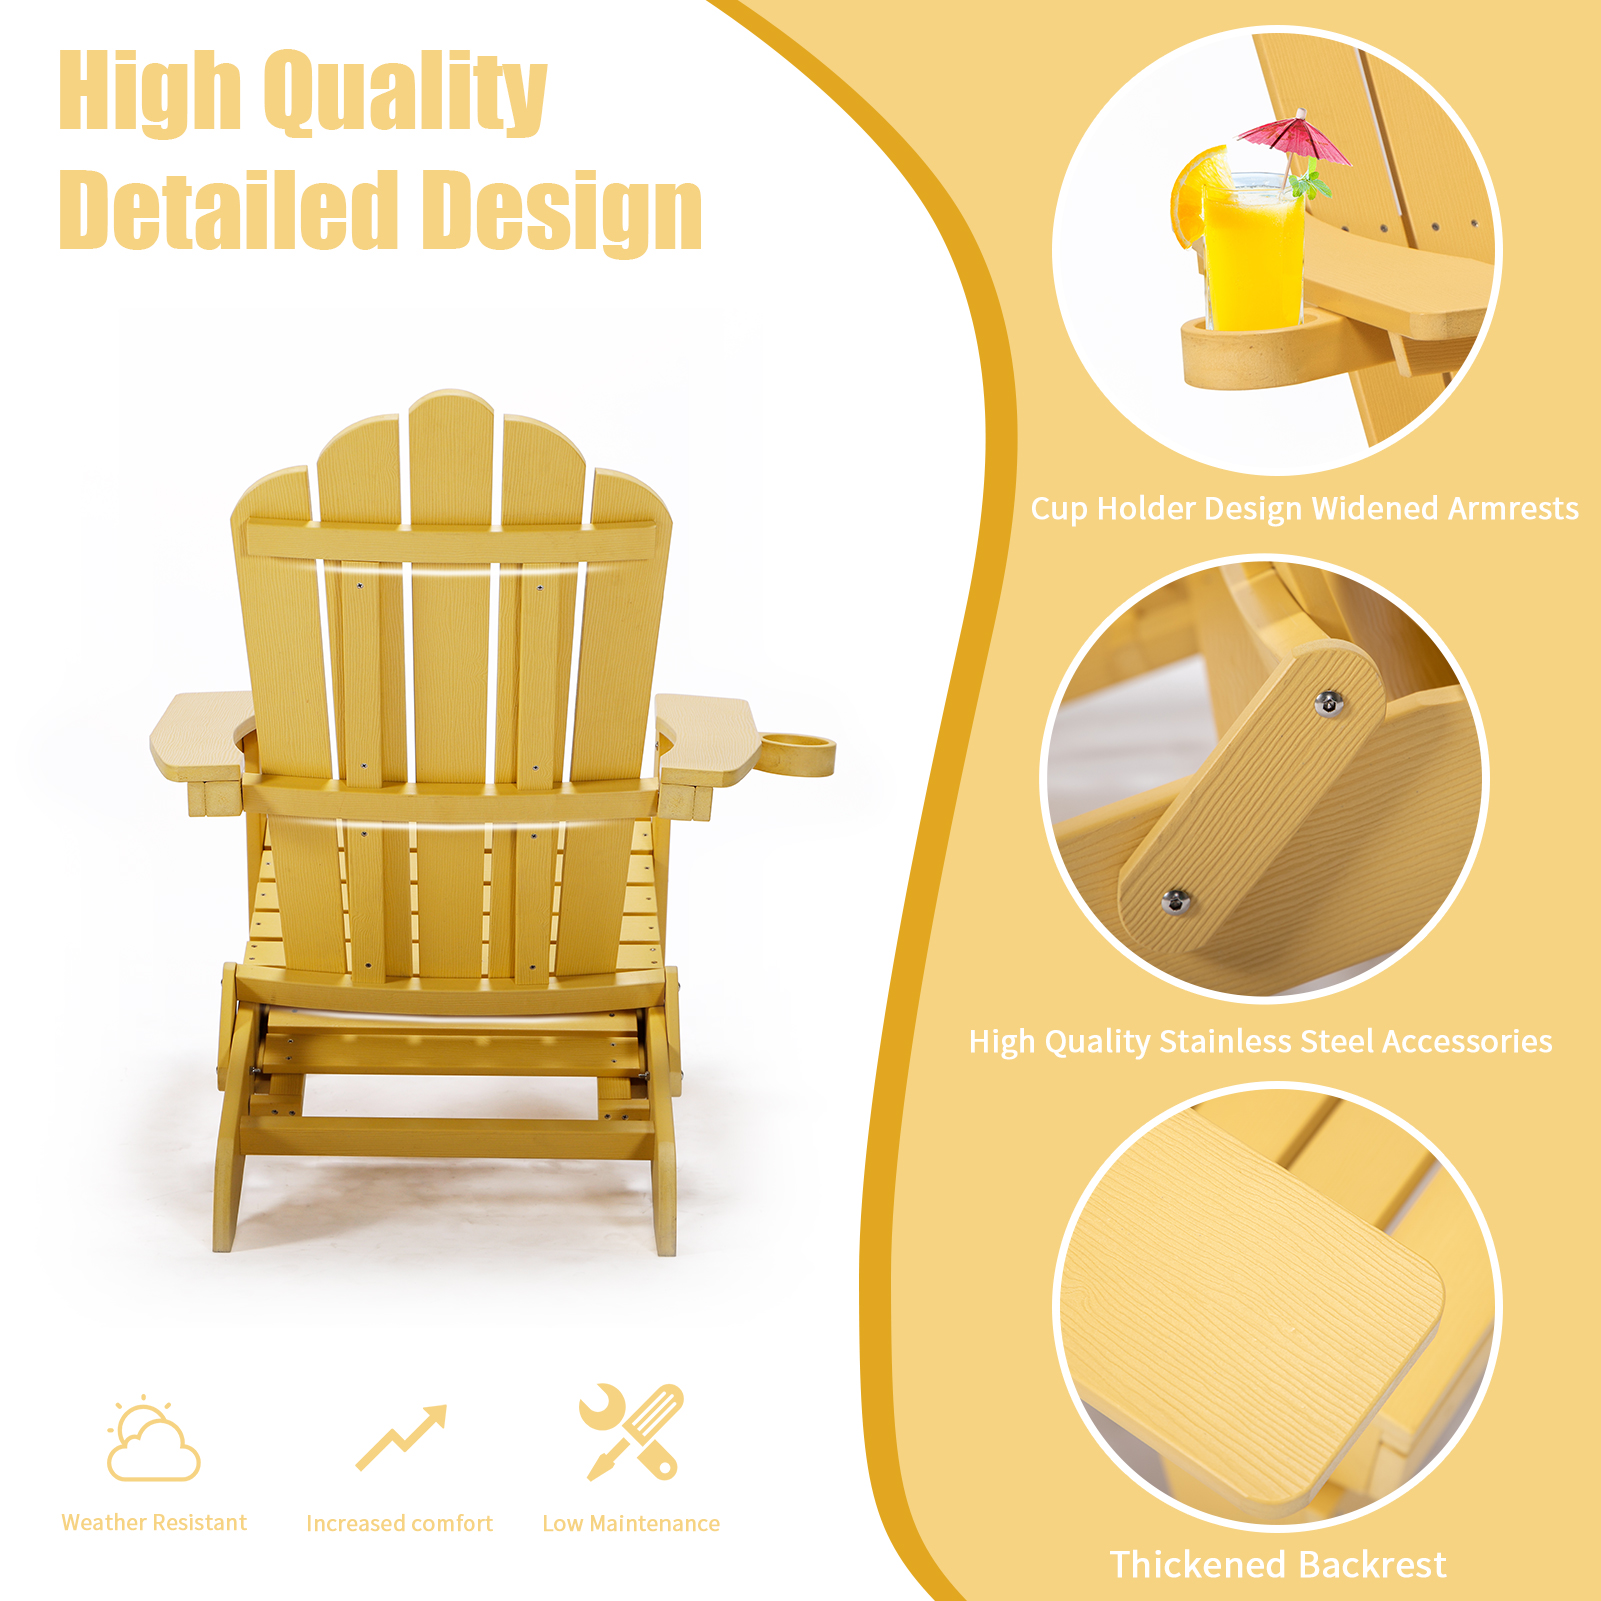 Wood Outdoor Adirondack Chair, Adirondack Chairs Folding Outdoor Patio Chairs, Wooden Accent Lounge Furniture for Yard, Patio - image 3 of 10